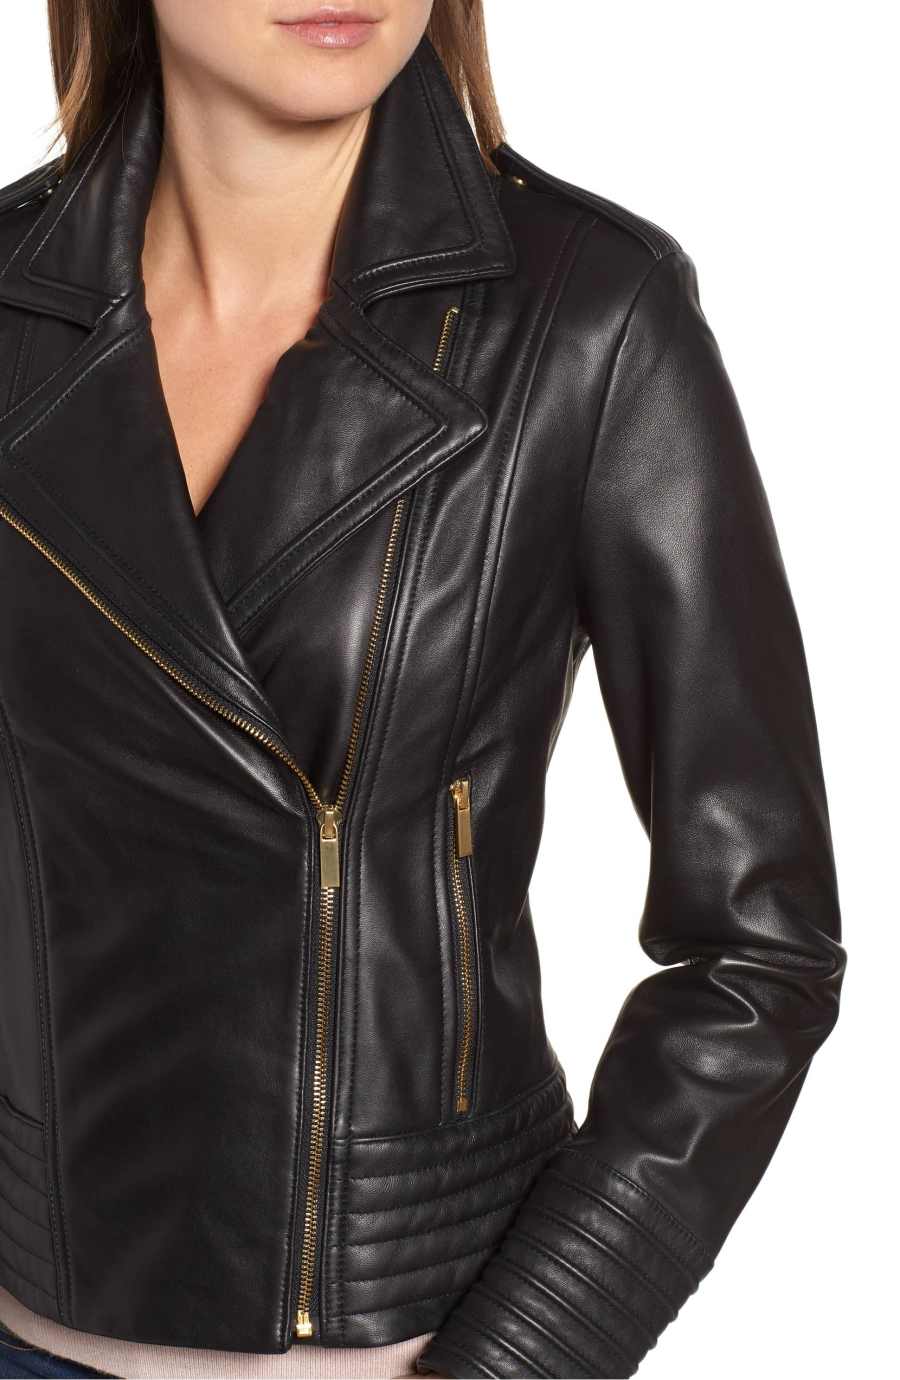 Shop This Badgley Mischka Leather Jacket on Sale at Nordstrom | Us Weekly